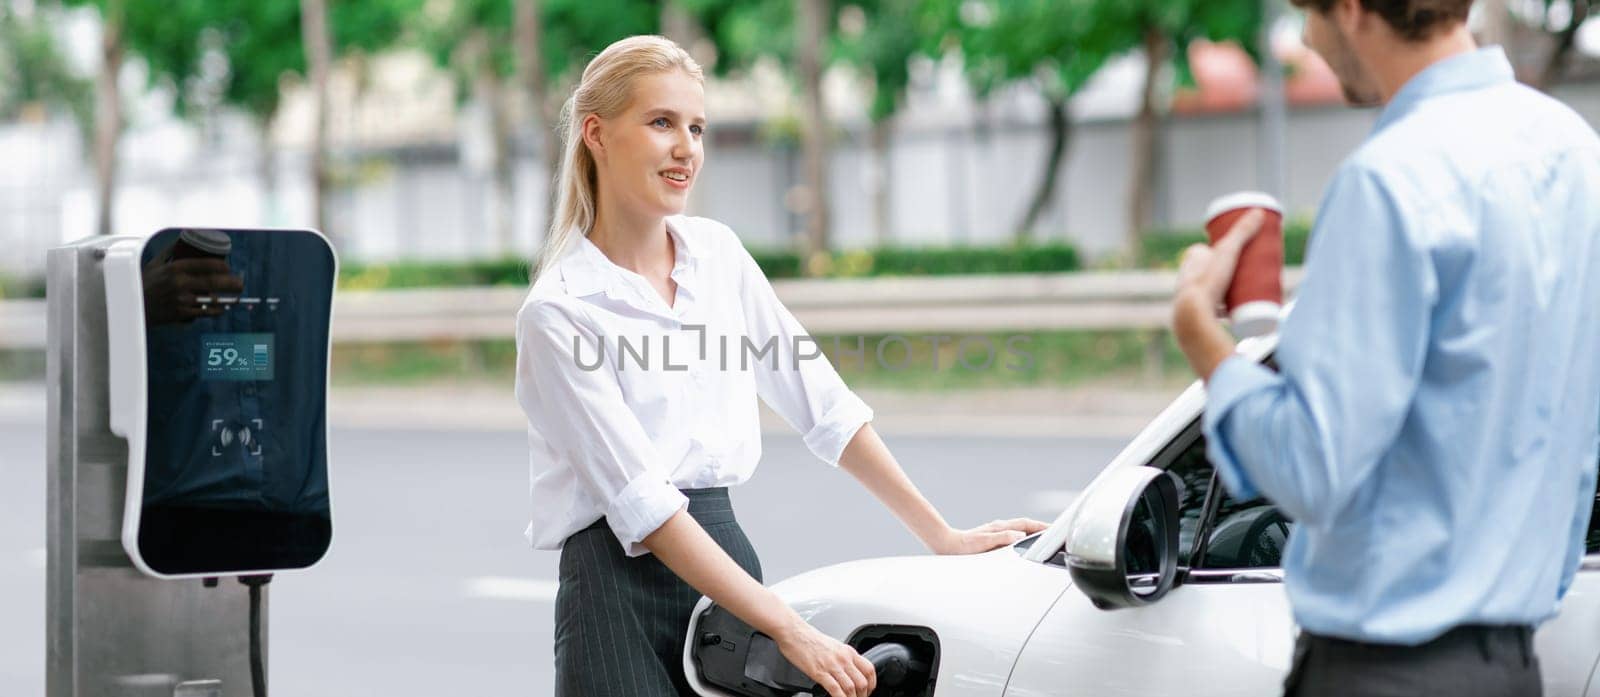 Progressive businessman and businesswoman with electric car parking and connected to public charging station before driving around city center. Eco friendly rechargeable car powered by clean energy.